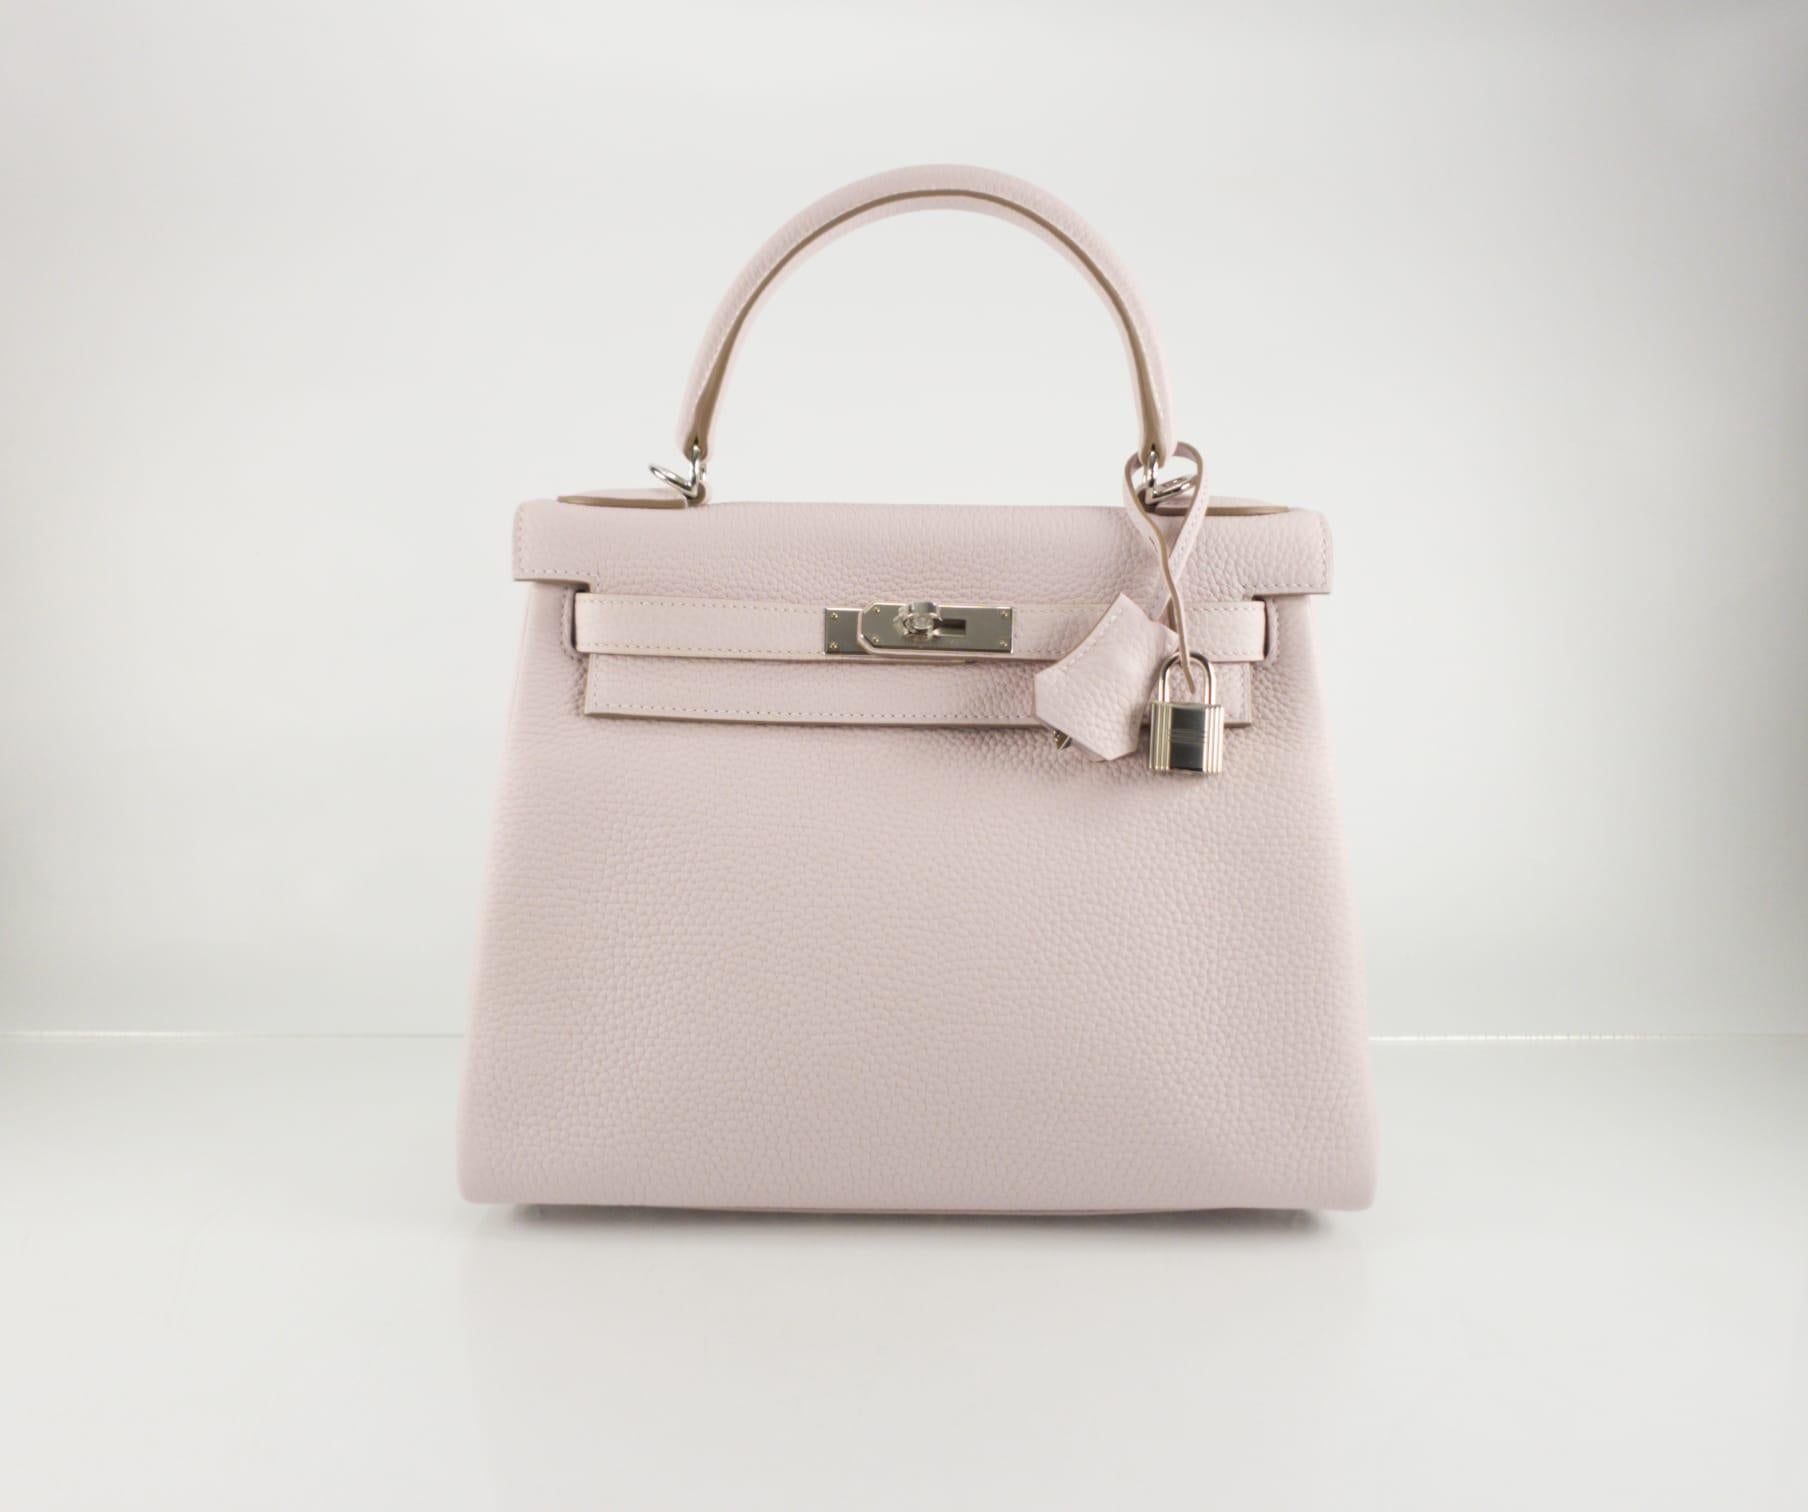 Kelly 28 Retourne Mauve Pale Taurillon Clemence Phw Stamp B Brand New in Box In New Condition For Sale In Nicosia, CY